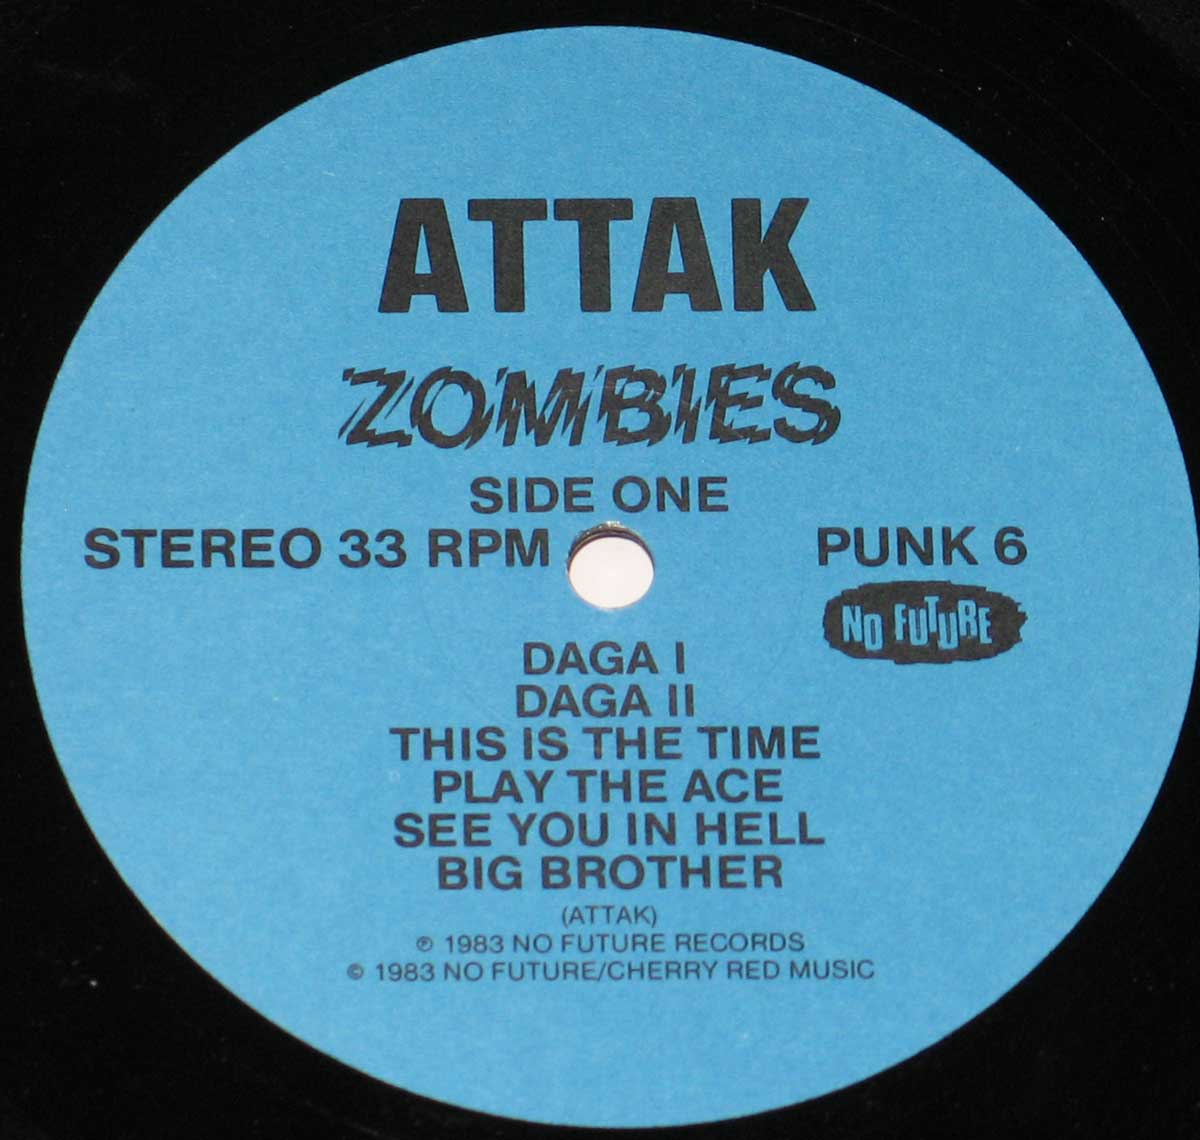 Enlarged High Resolution Photo of the Record's label ATTAK - Zombies https://vinyl-records.nl